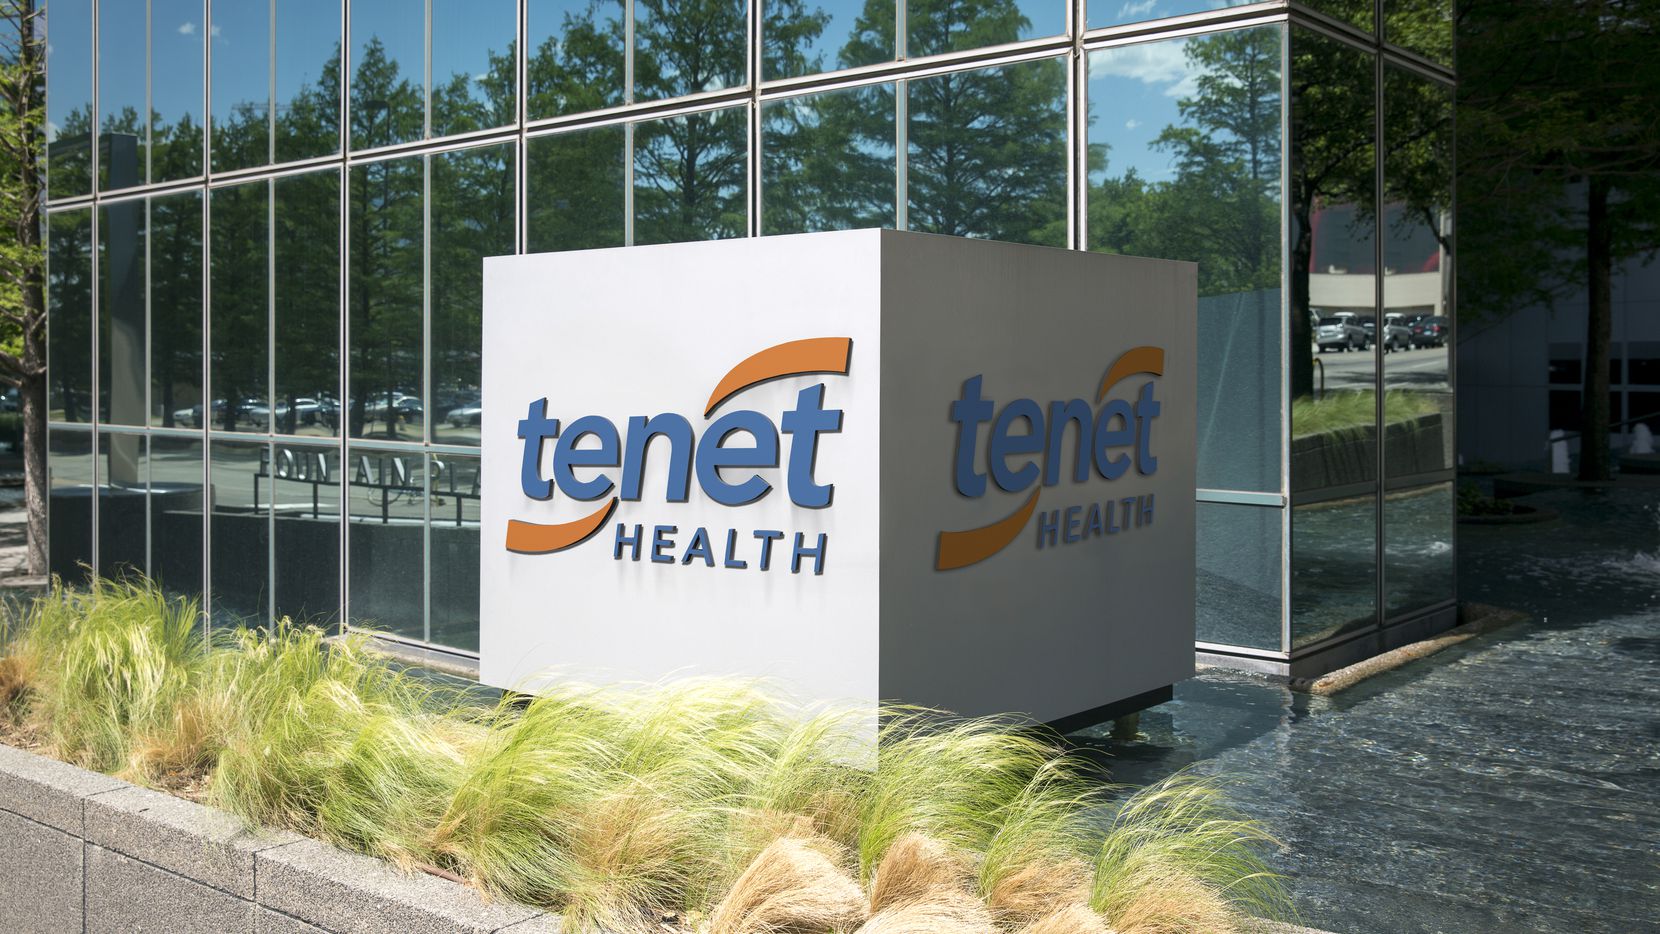 Tenet Healthcare, which has 8,300 employees in North Texas, faces a squeeze from rising...